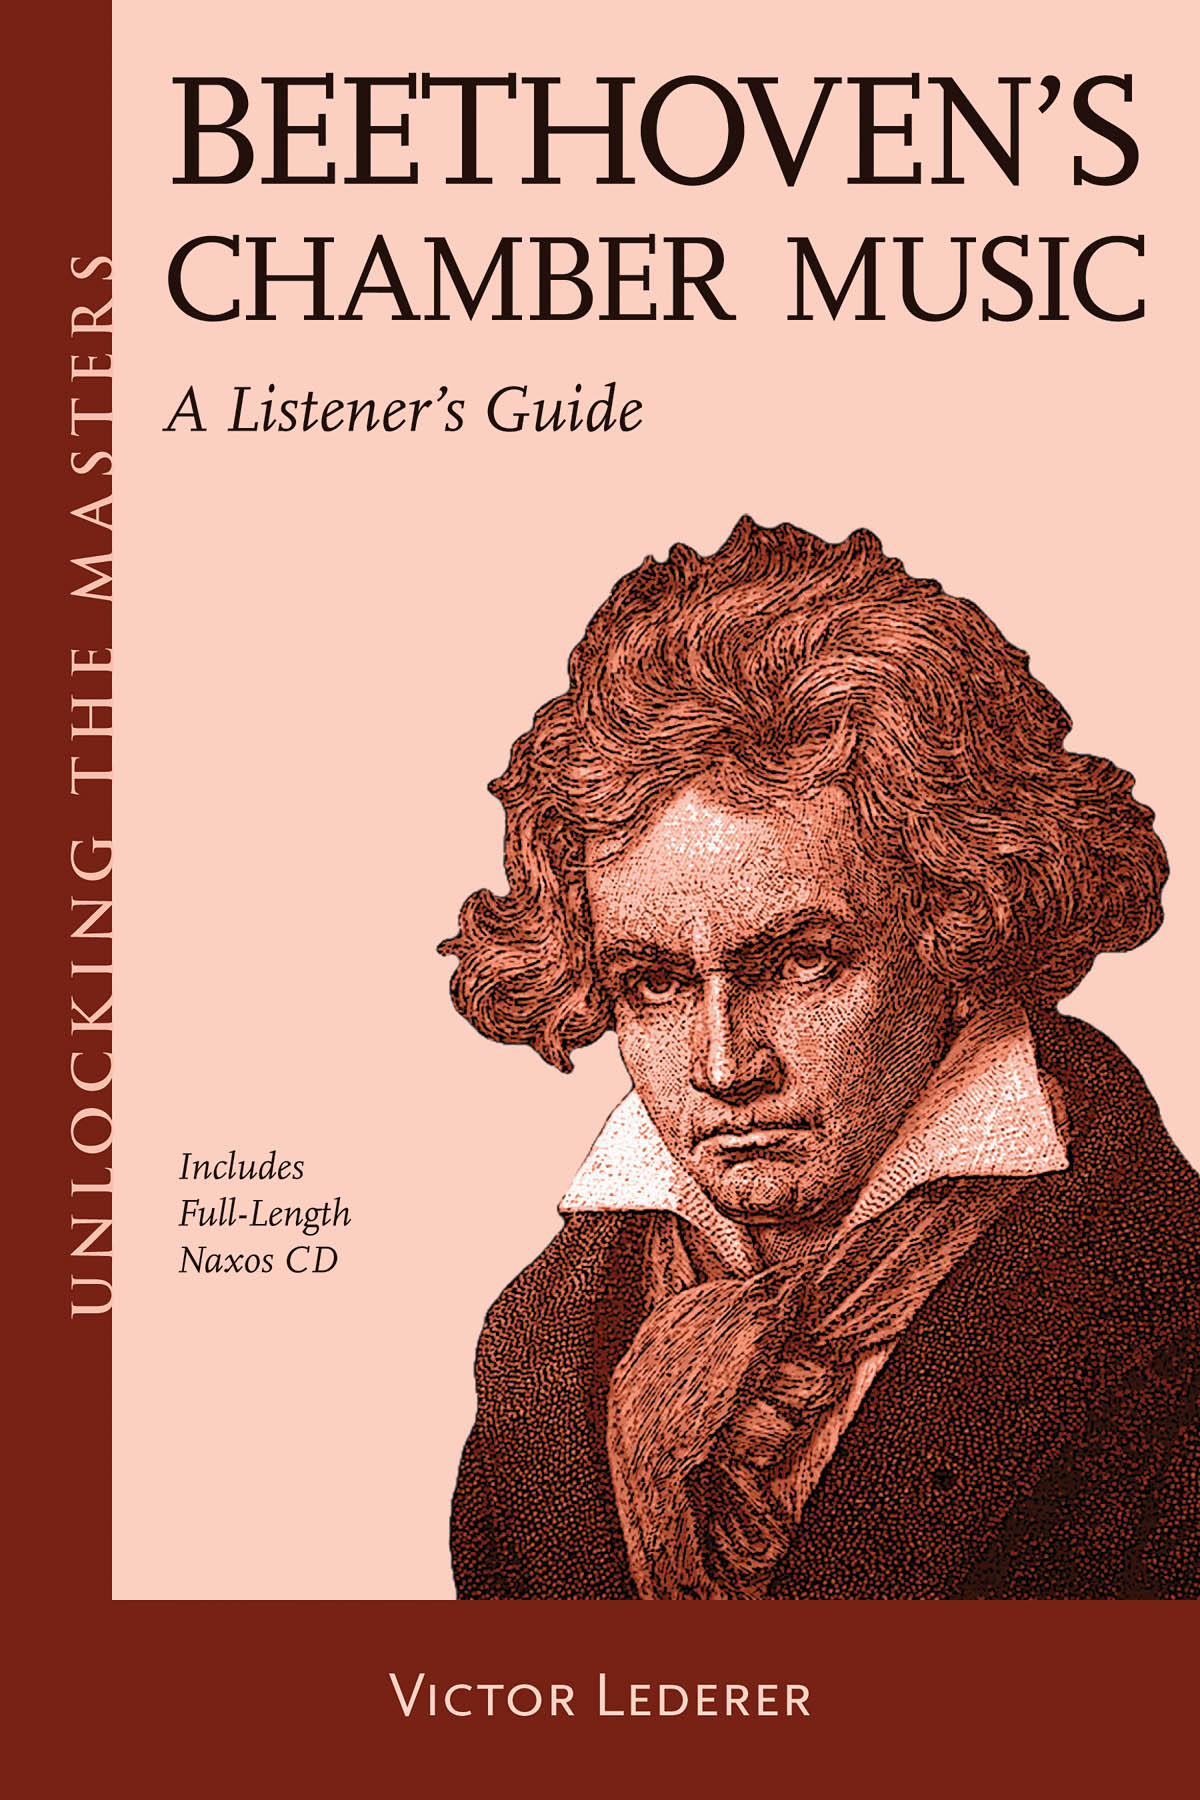 Beethoven's Chamber Music: Reference Books